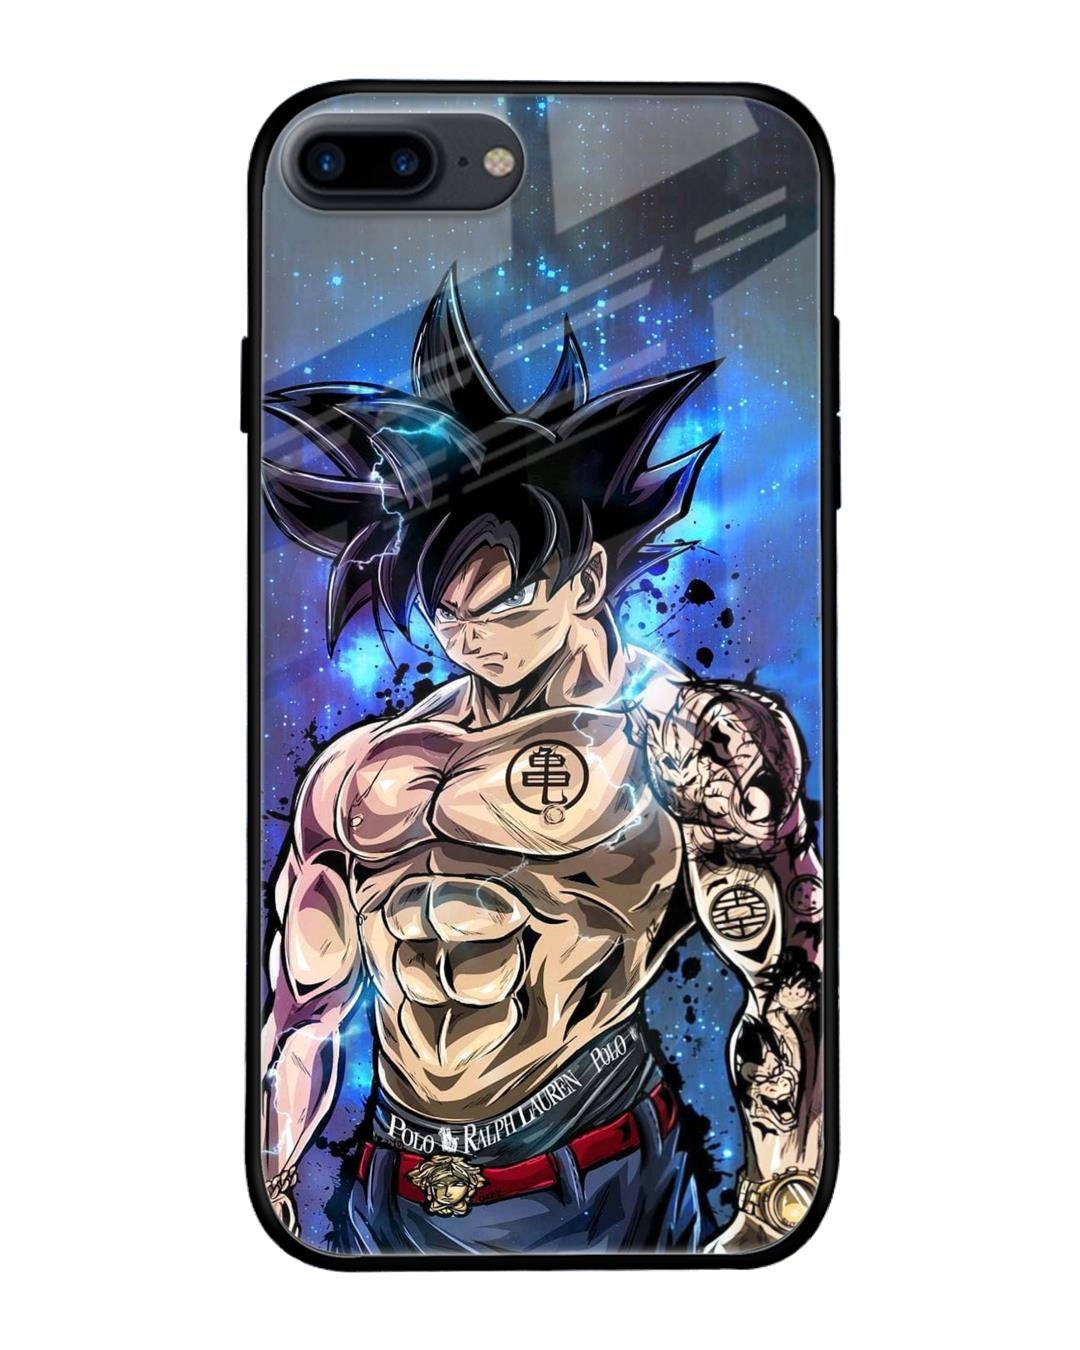 Buy Voleano back cover for Apple Iphone 12Iphone 12Pro Itachi Anime  Fire Naruto Sasuke cases cover Online at Best Prices in India  JioMart